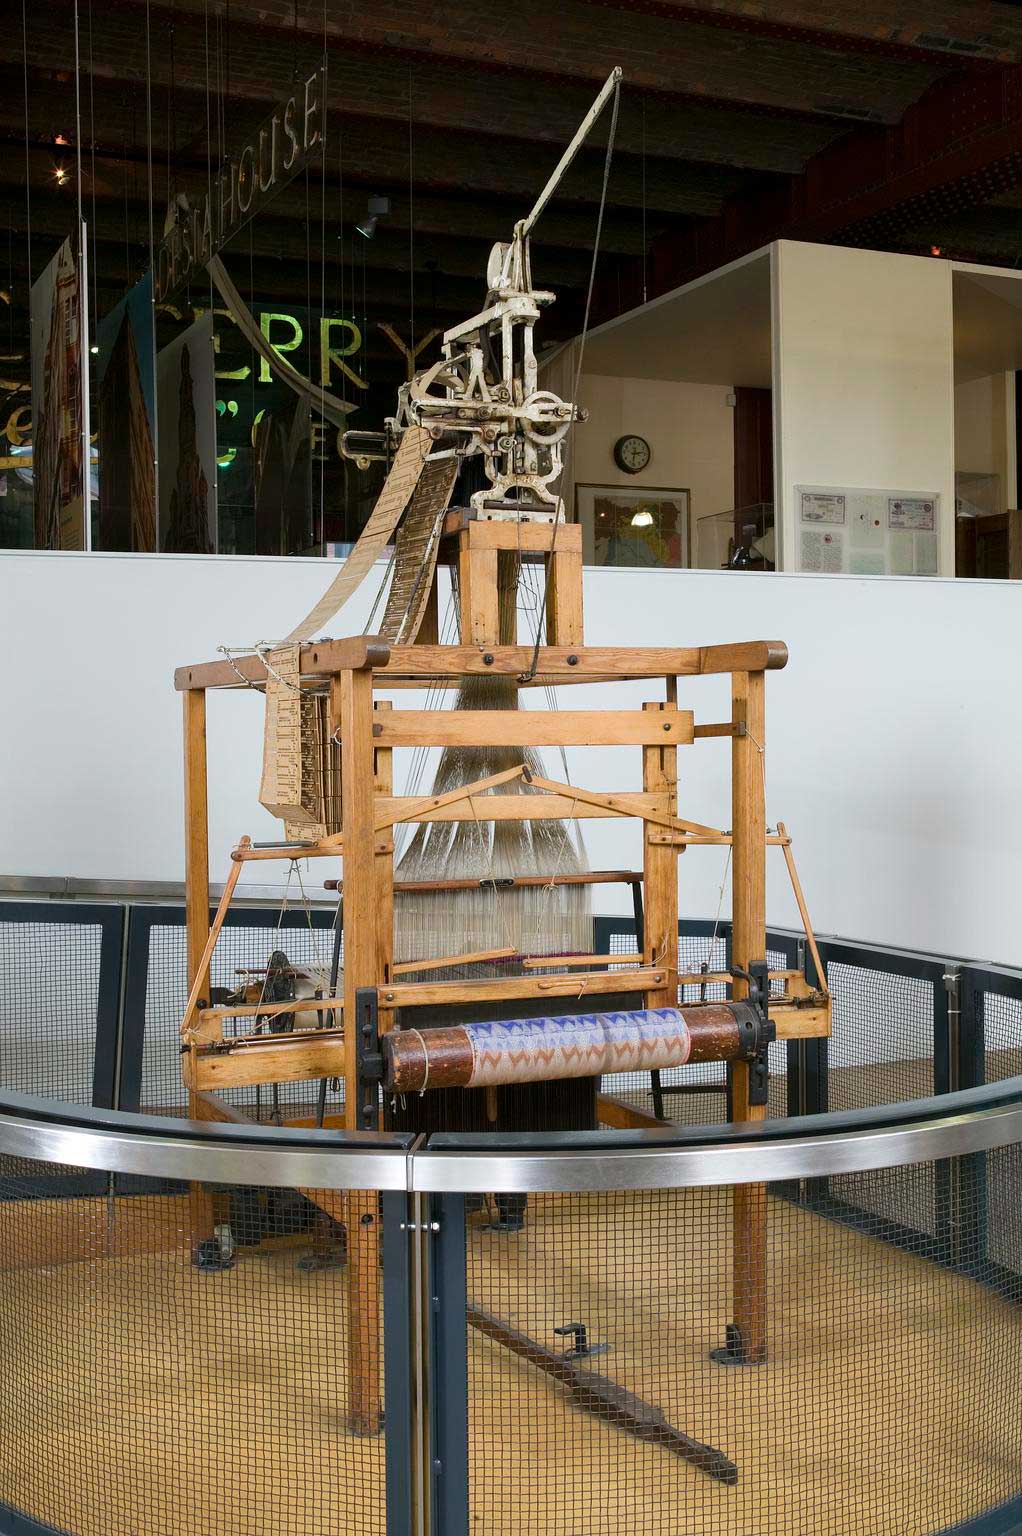 A loom from the early 1900s